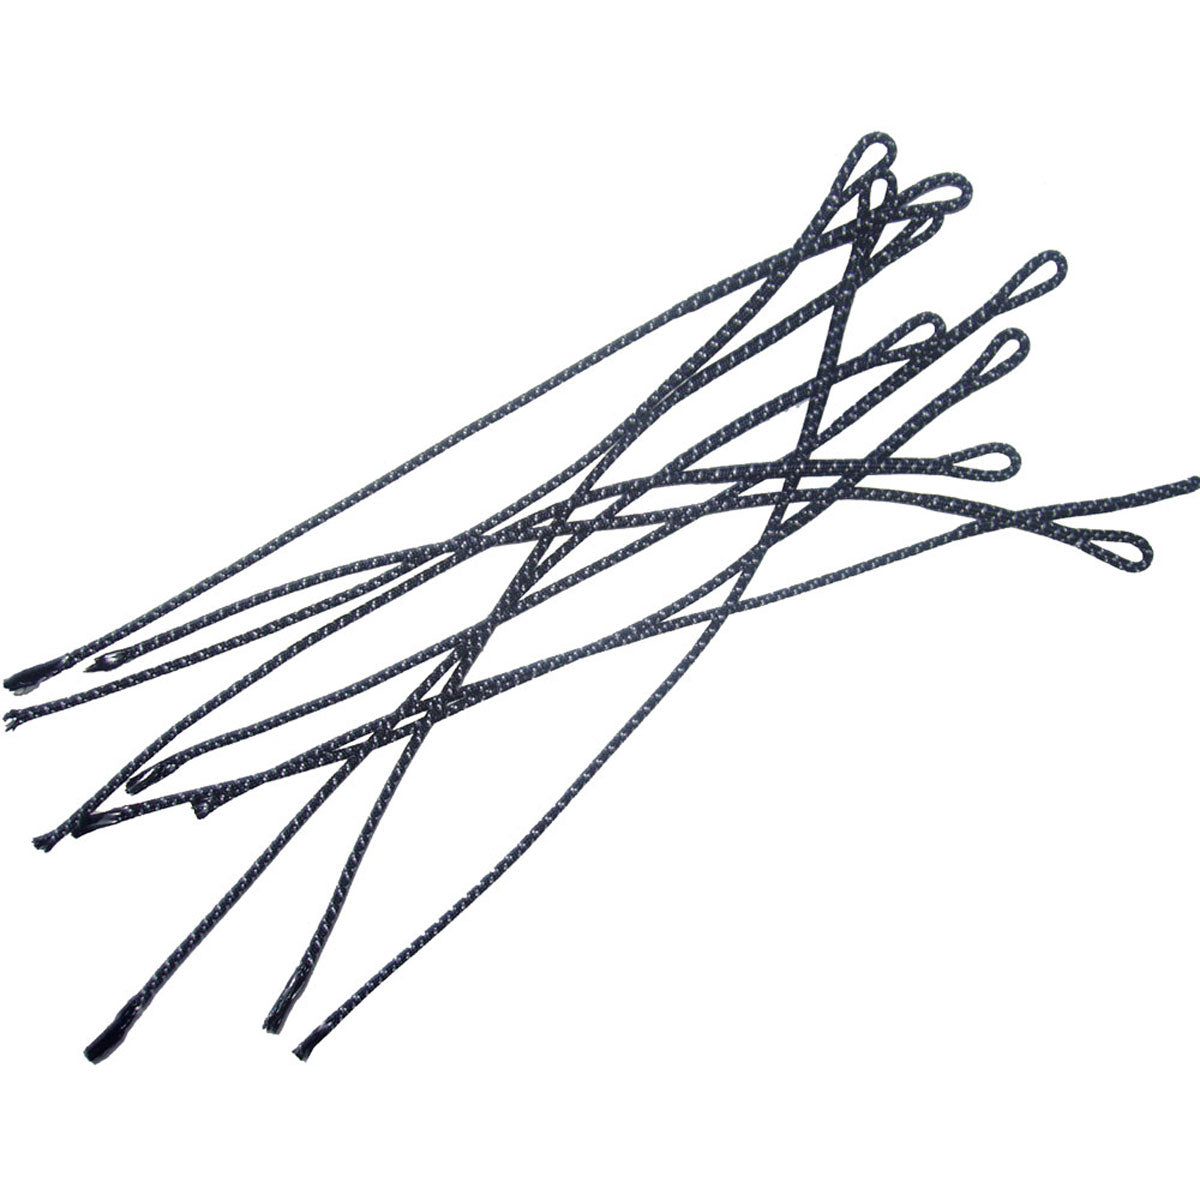 Whip Popper/Cracker Replacement - 10/Pack